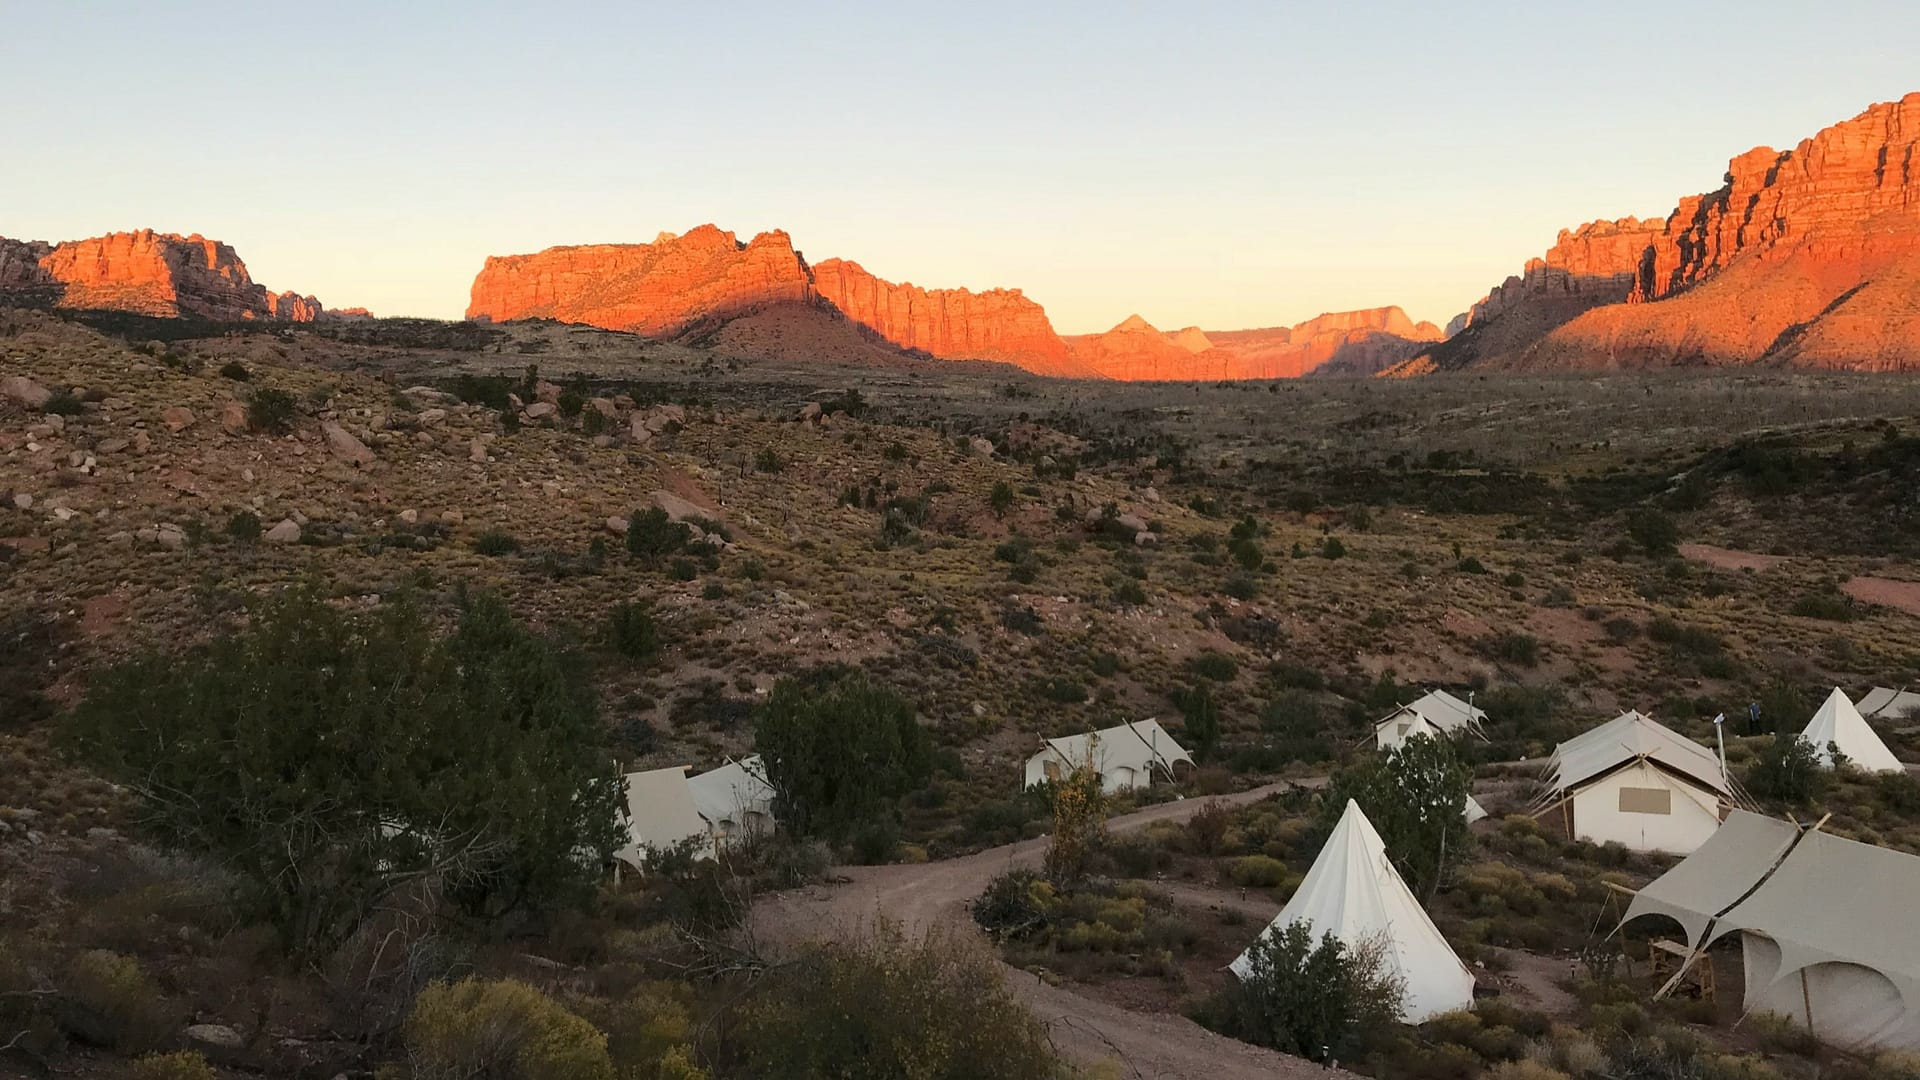 A glamping area overlooking the rock formations and mountains of Zion National Park around sunset. Photo by Bulent Keles.